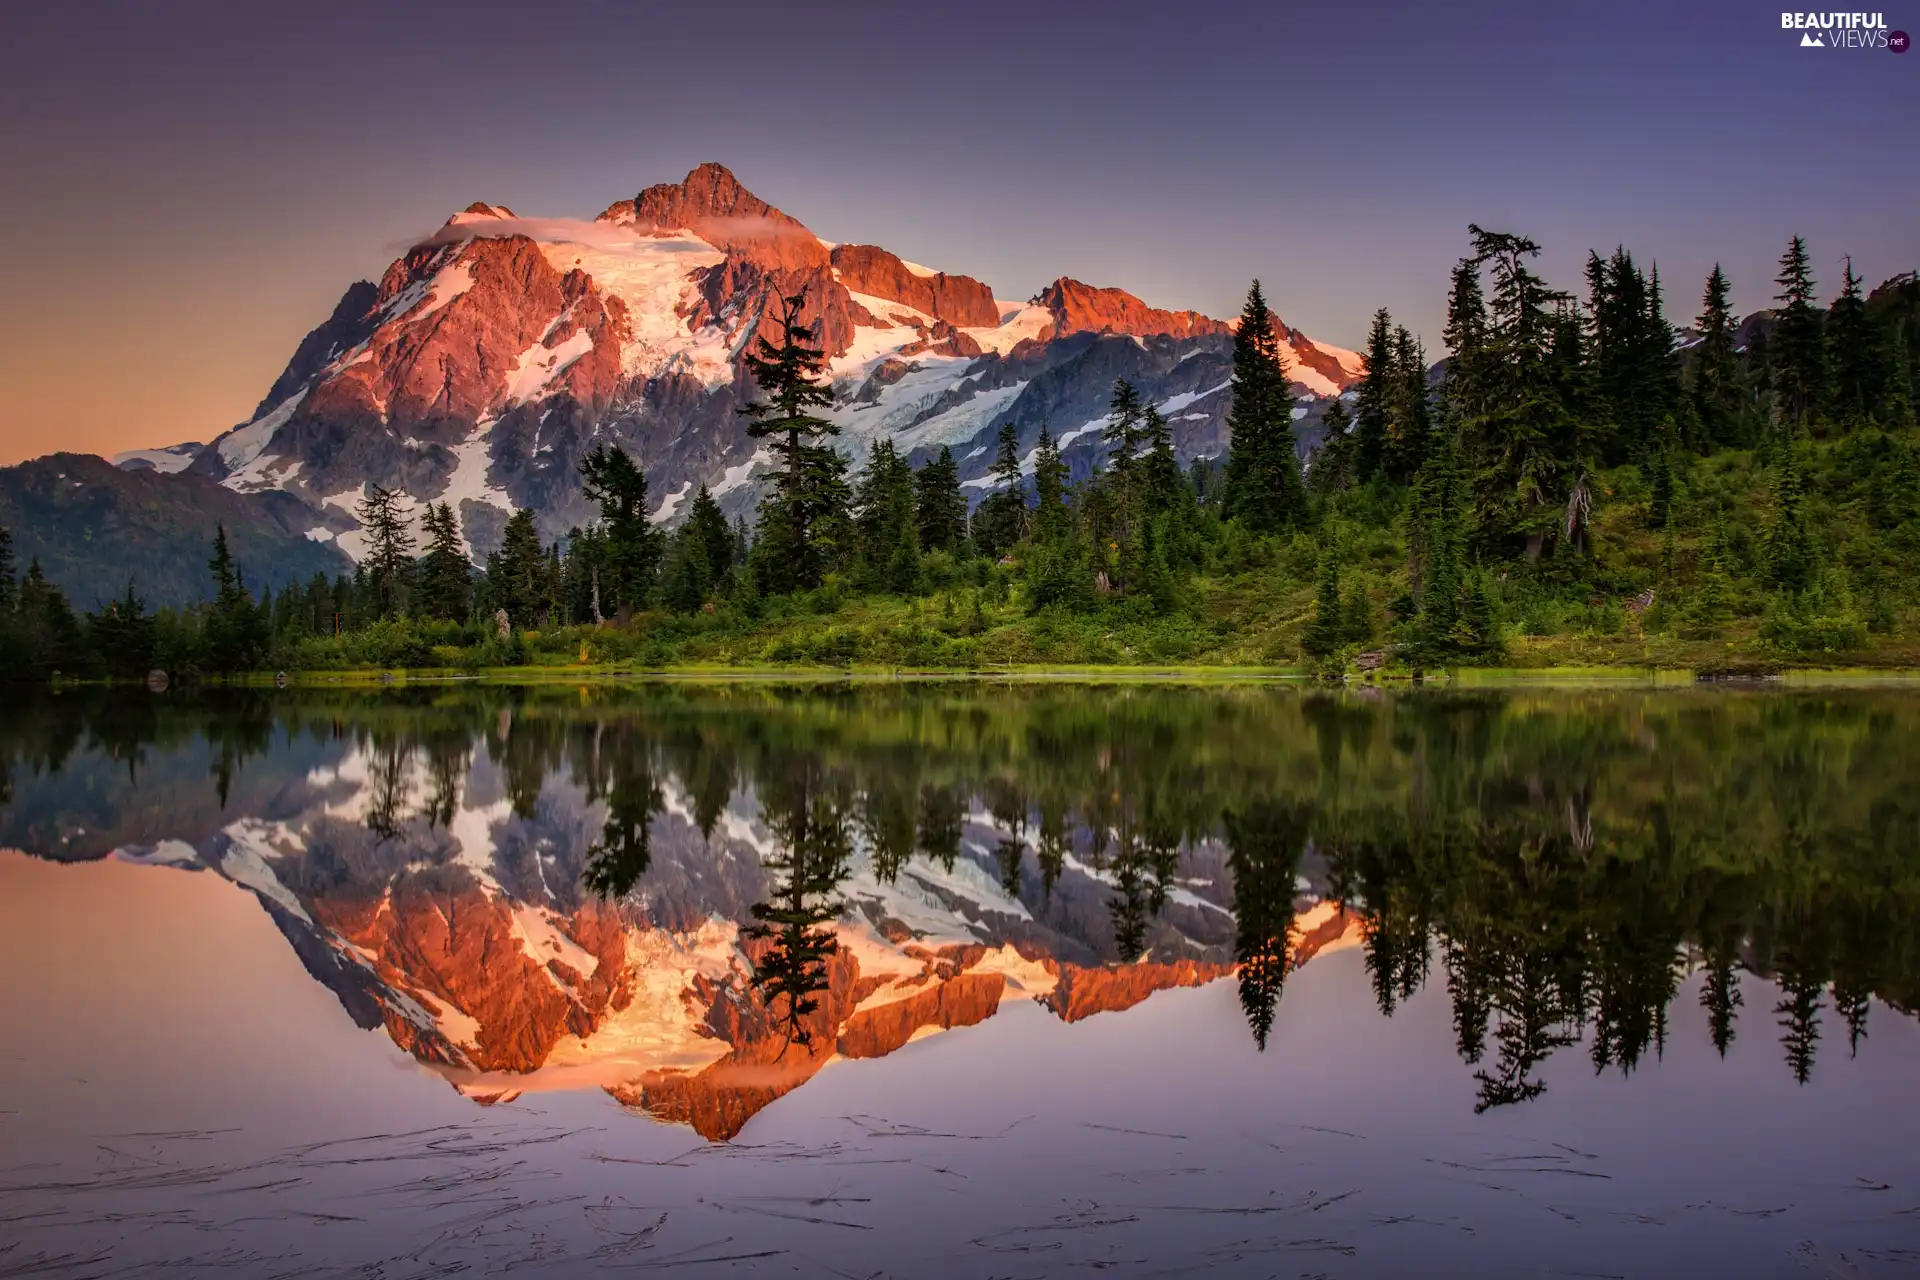 Mountains, forest, reflection, lake